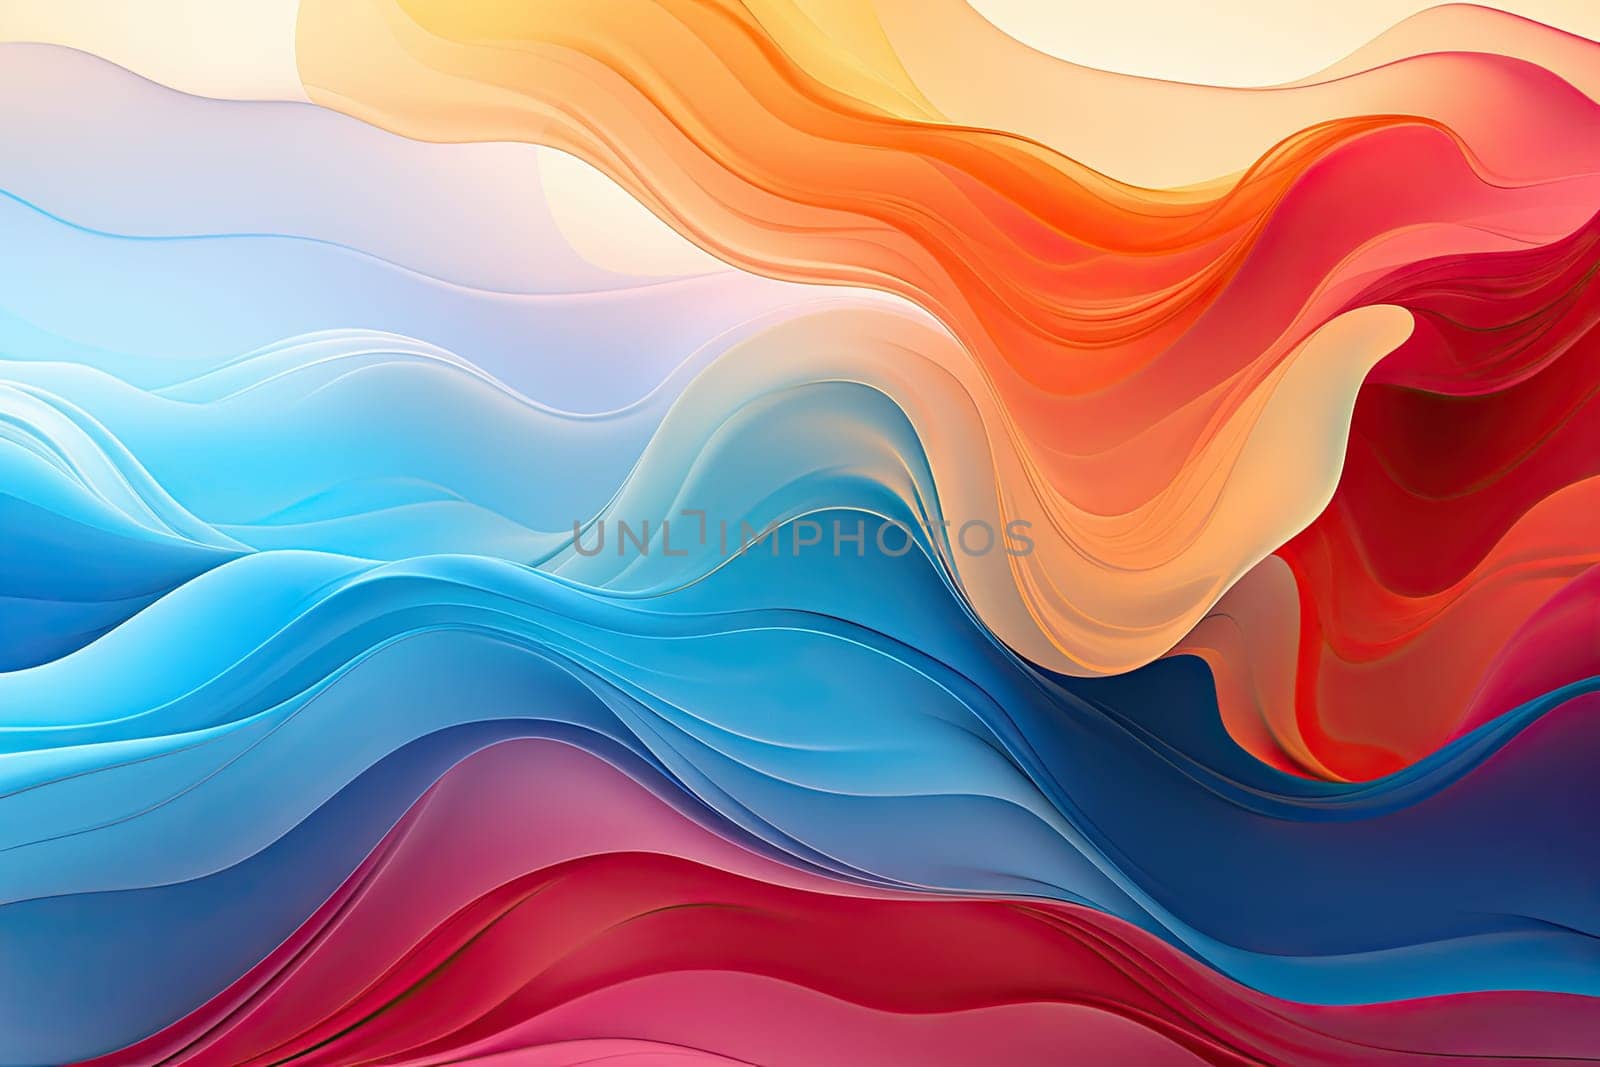 an abstract background with wavy lines and waves in red, orange, blue, yellow, pink, and white